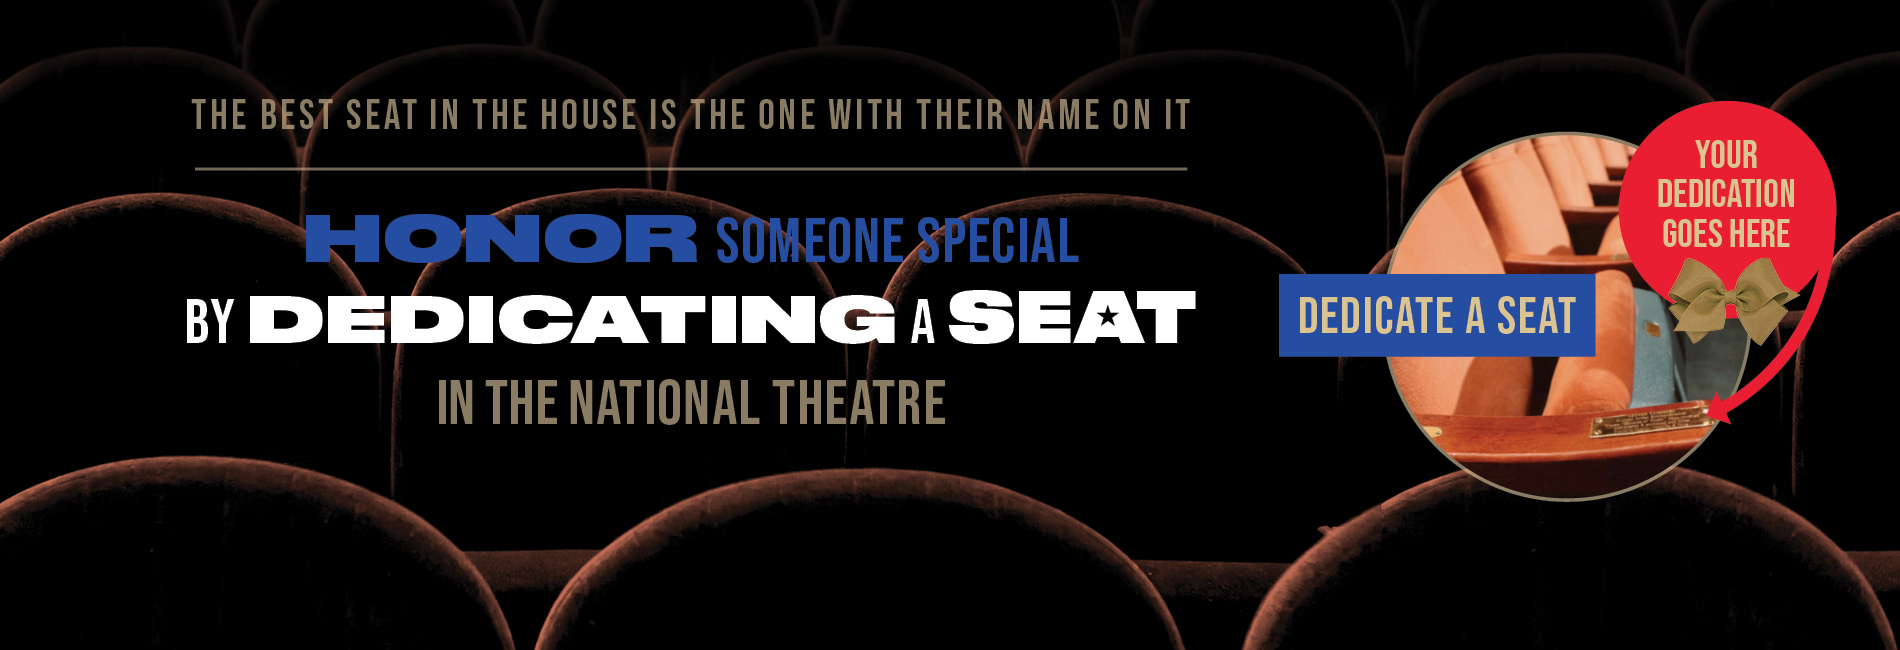 Slide 2: Dedicate a seat at The National